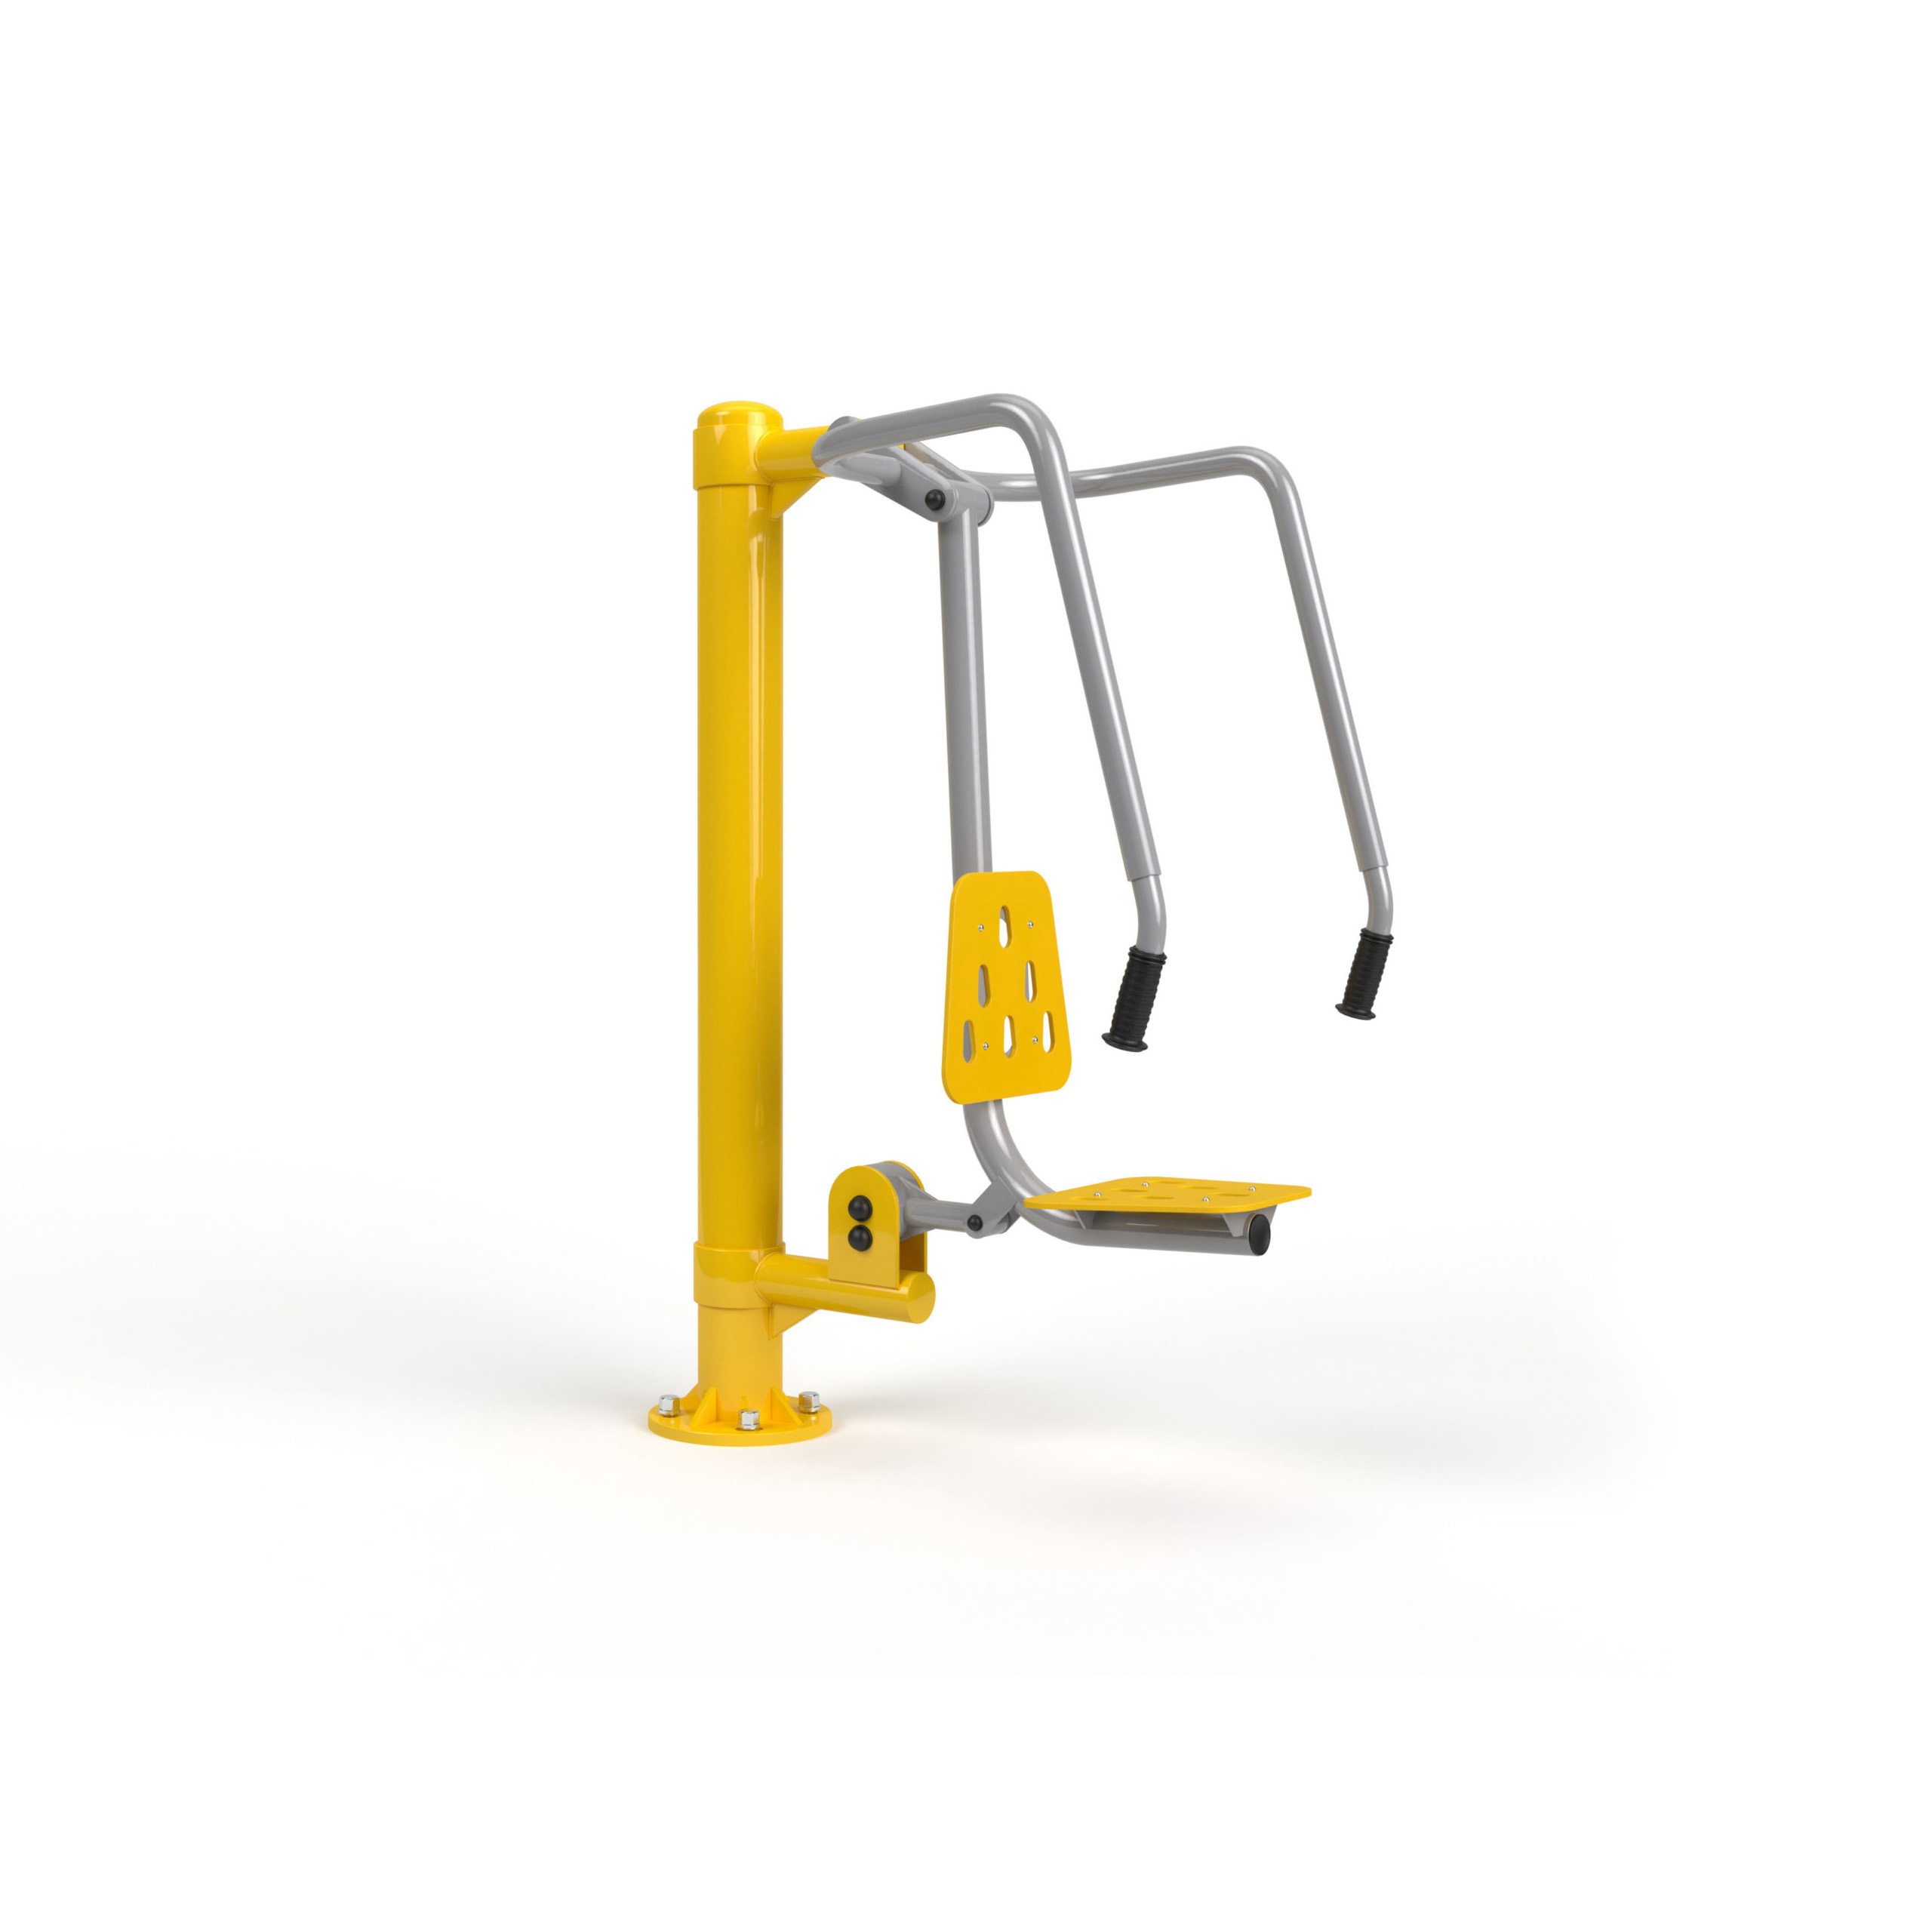 Outdoor Fitness Equipment - Push Chair - product visualization